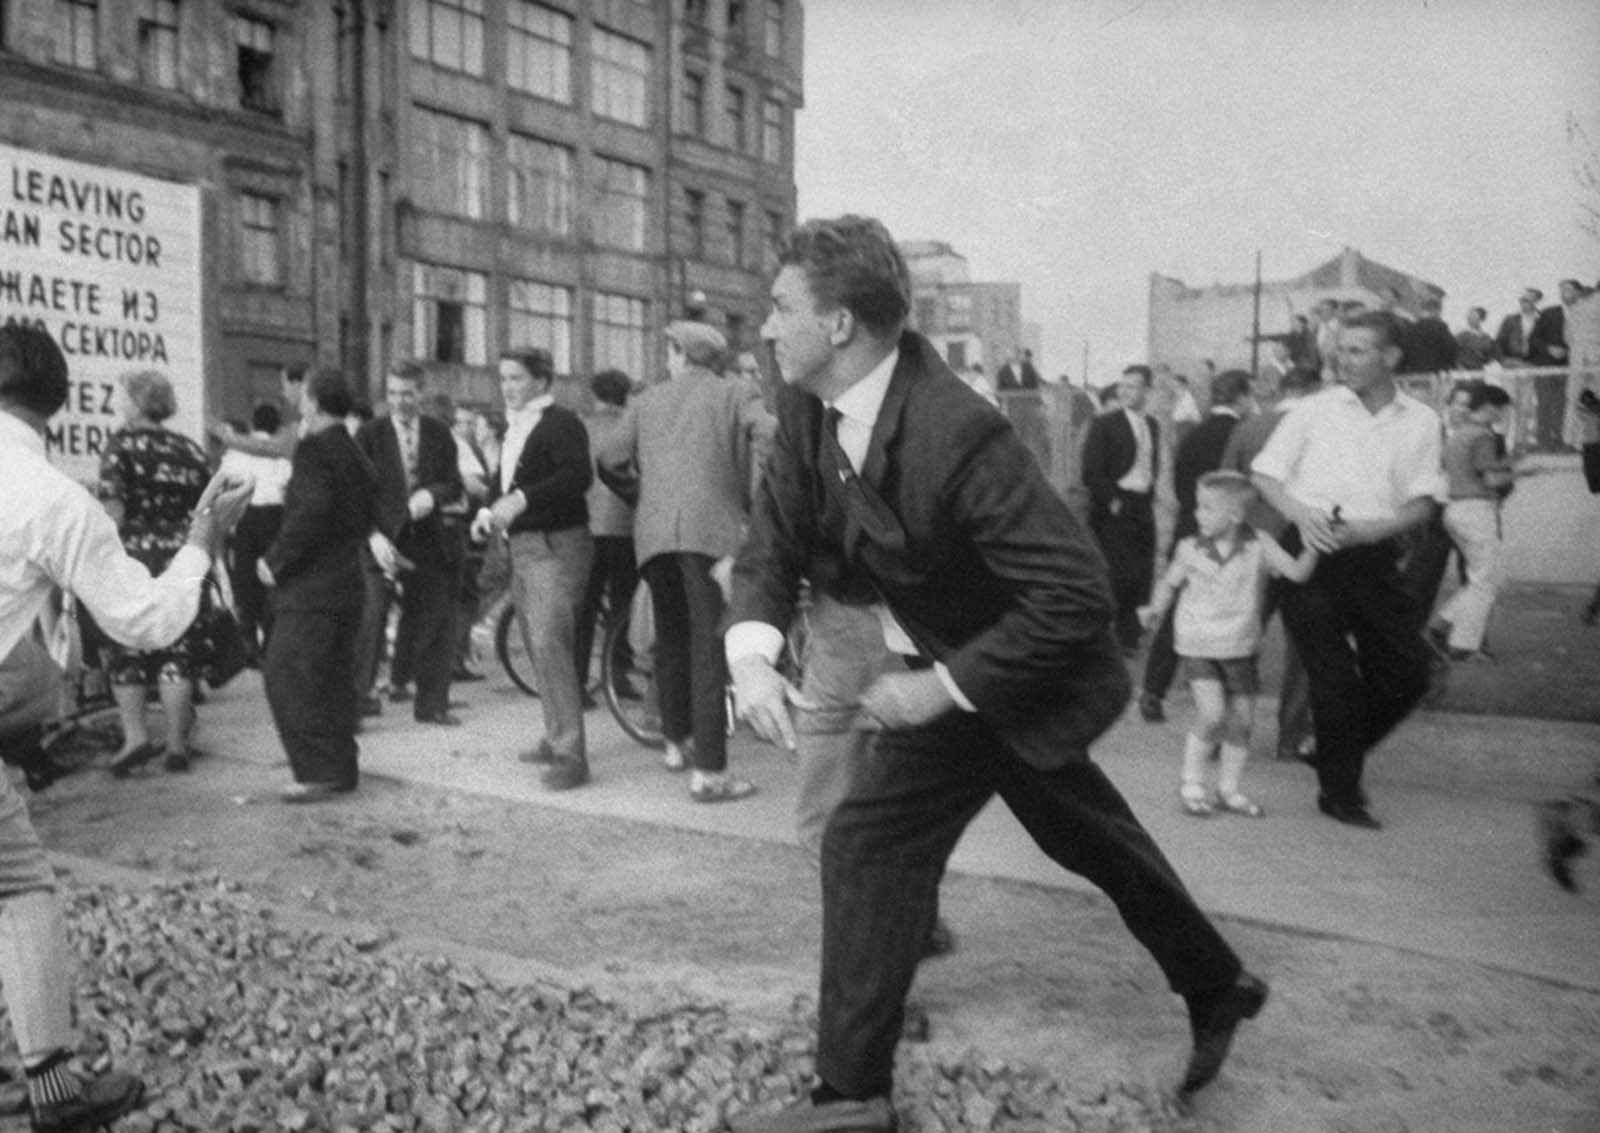 West Berliners, angered by taunts from East Berlin Police, throw rocks in August 1961.